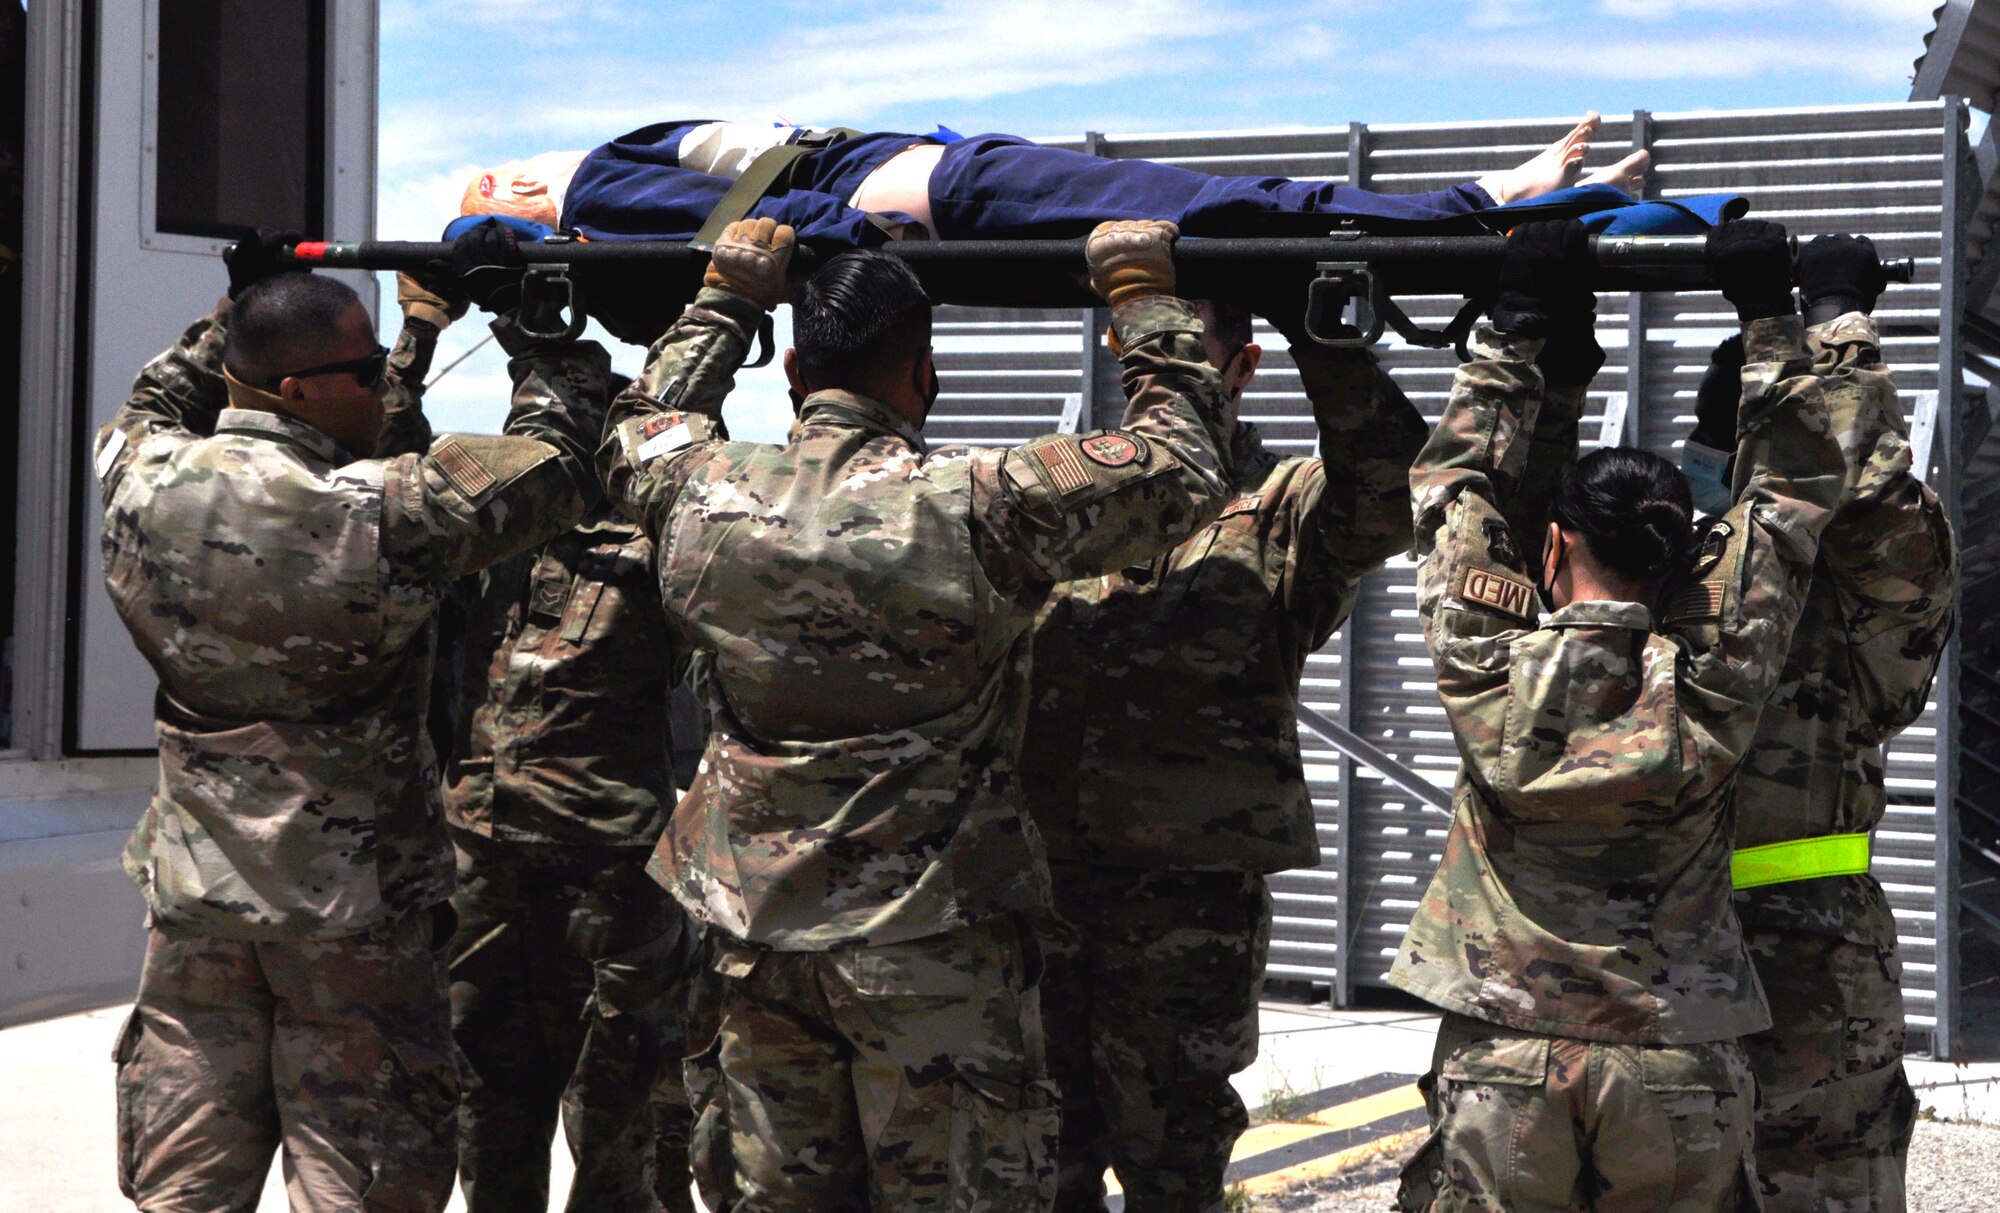 Image of Airmen lifting a stretcher.